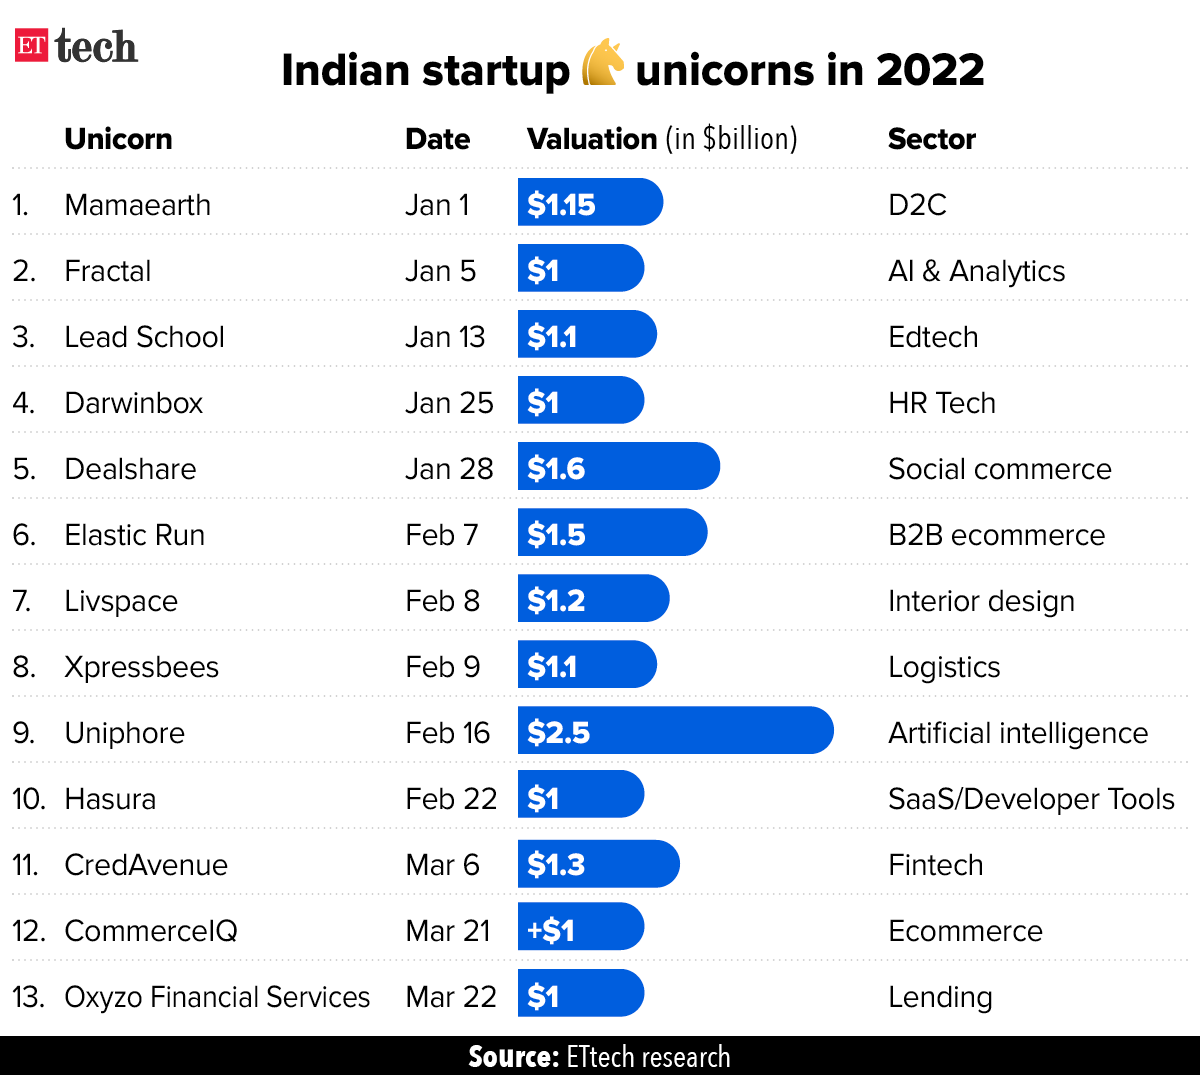 Indian startup unicorns in 2022_22_MAR_Graphic_ETTECH (1)